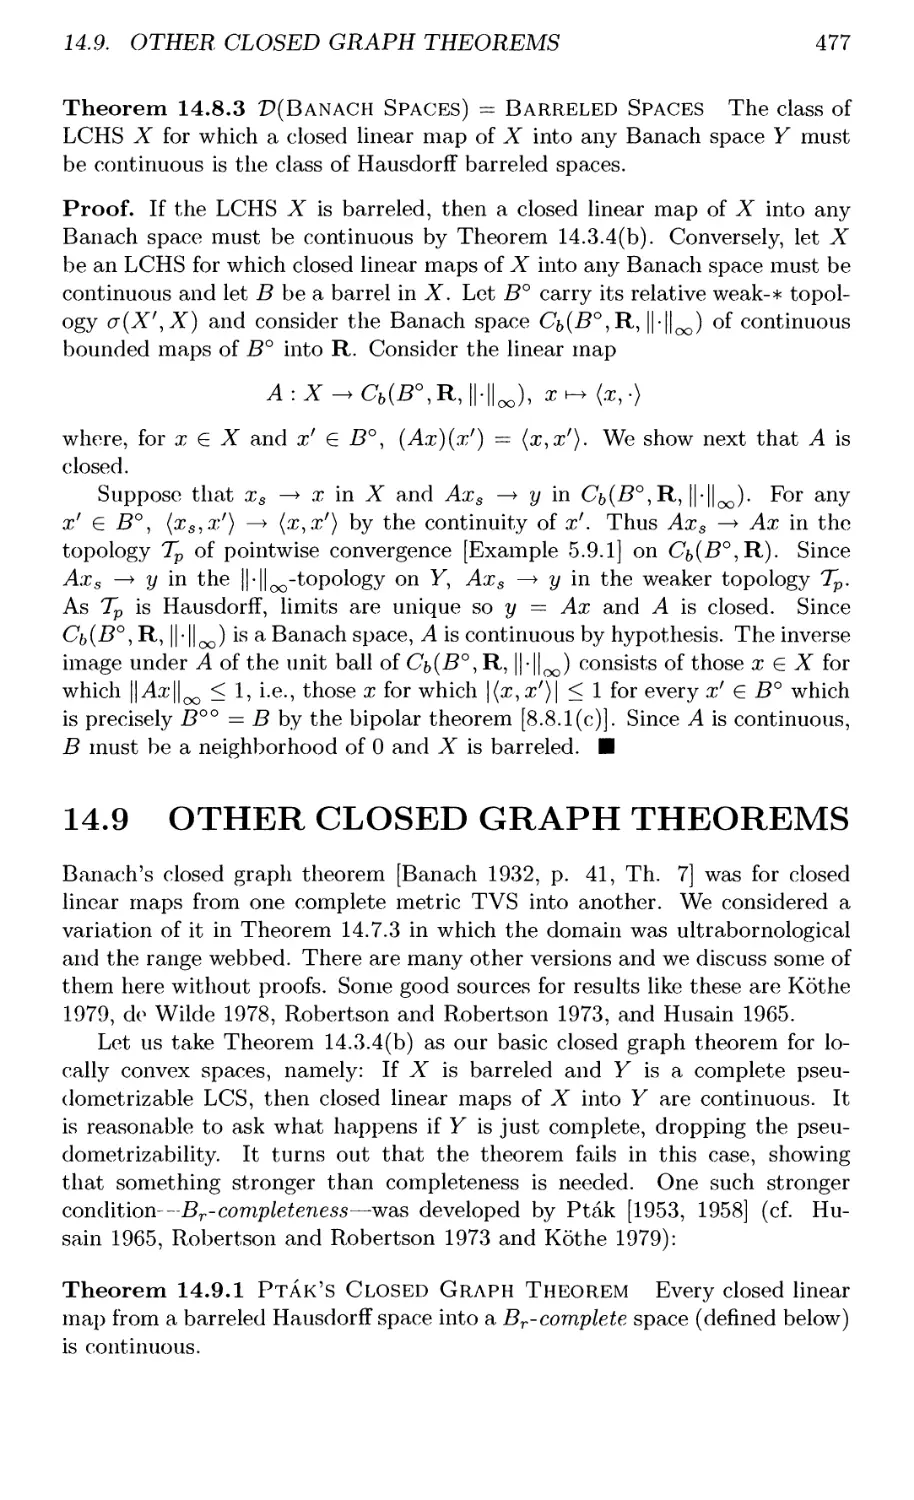 14.9 OTHER CLOSED GRAPH THEOREMS